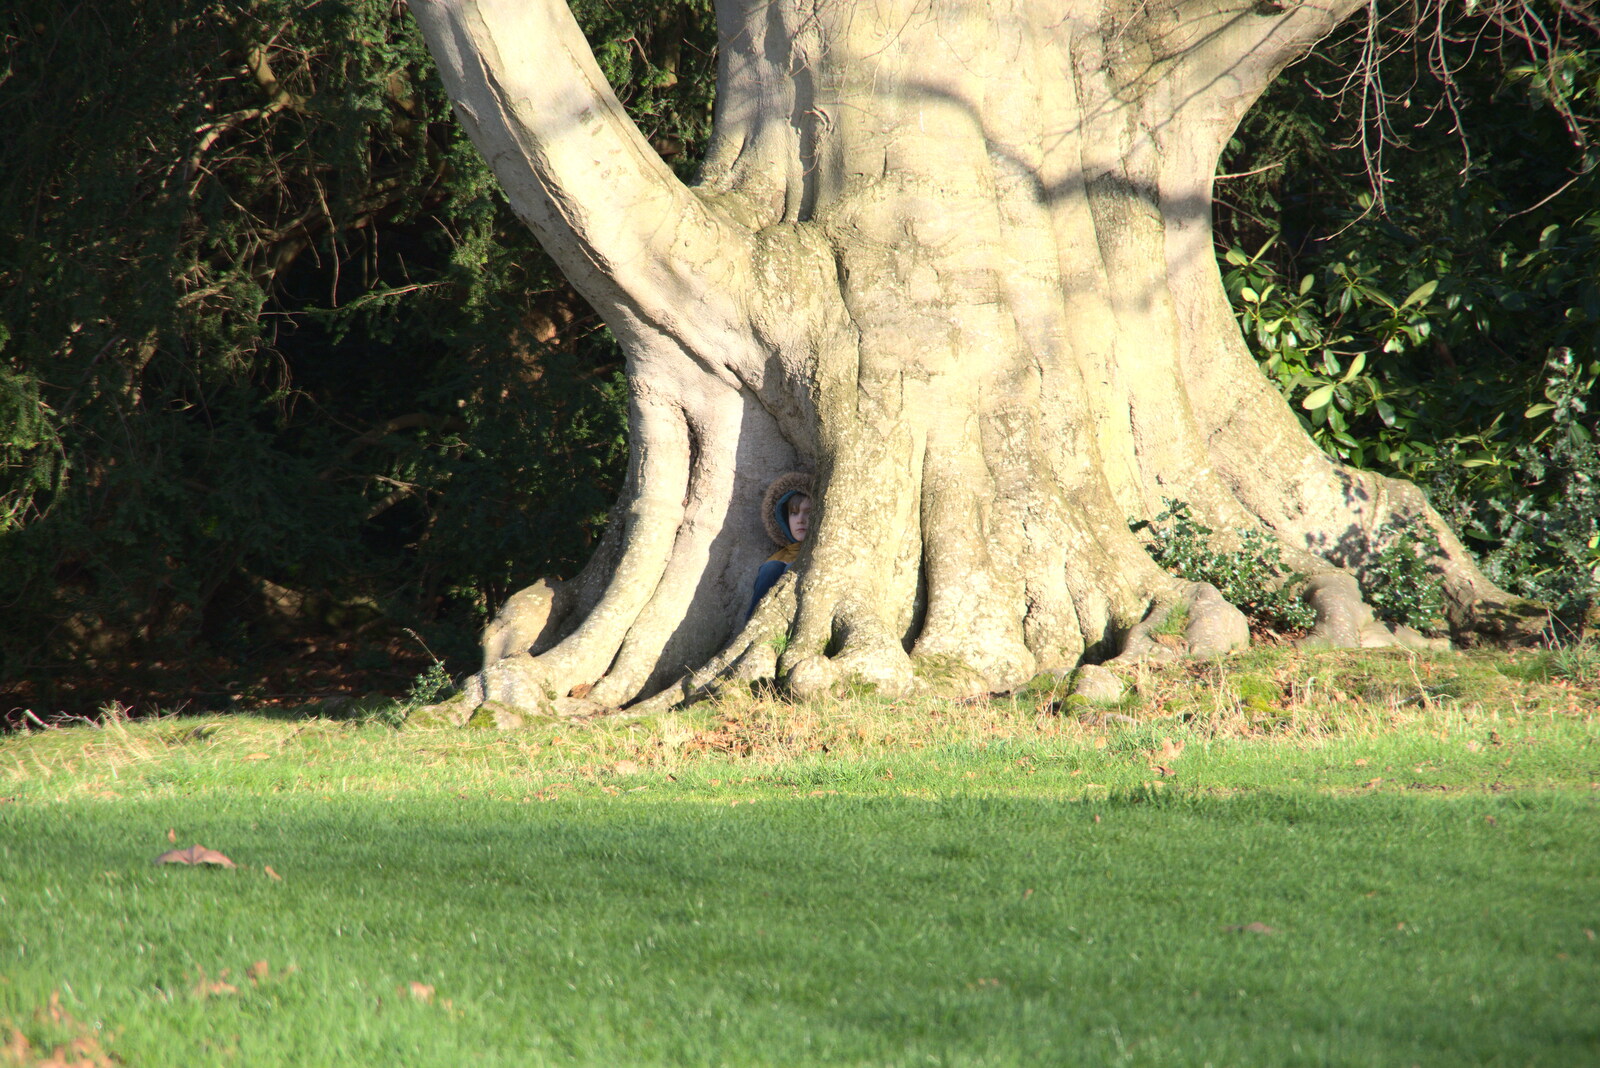 Harry's found a really good hiding place from A Visit to Blickling Hall, Aylsham, Norfolk - 9th January 2022